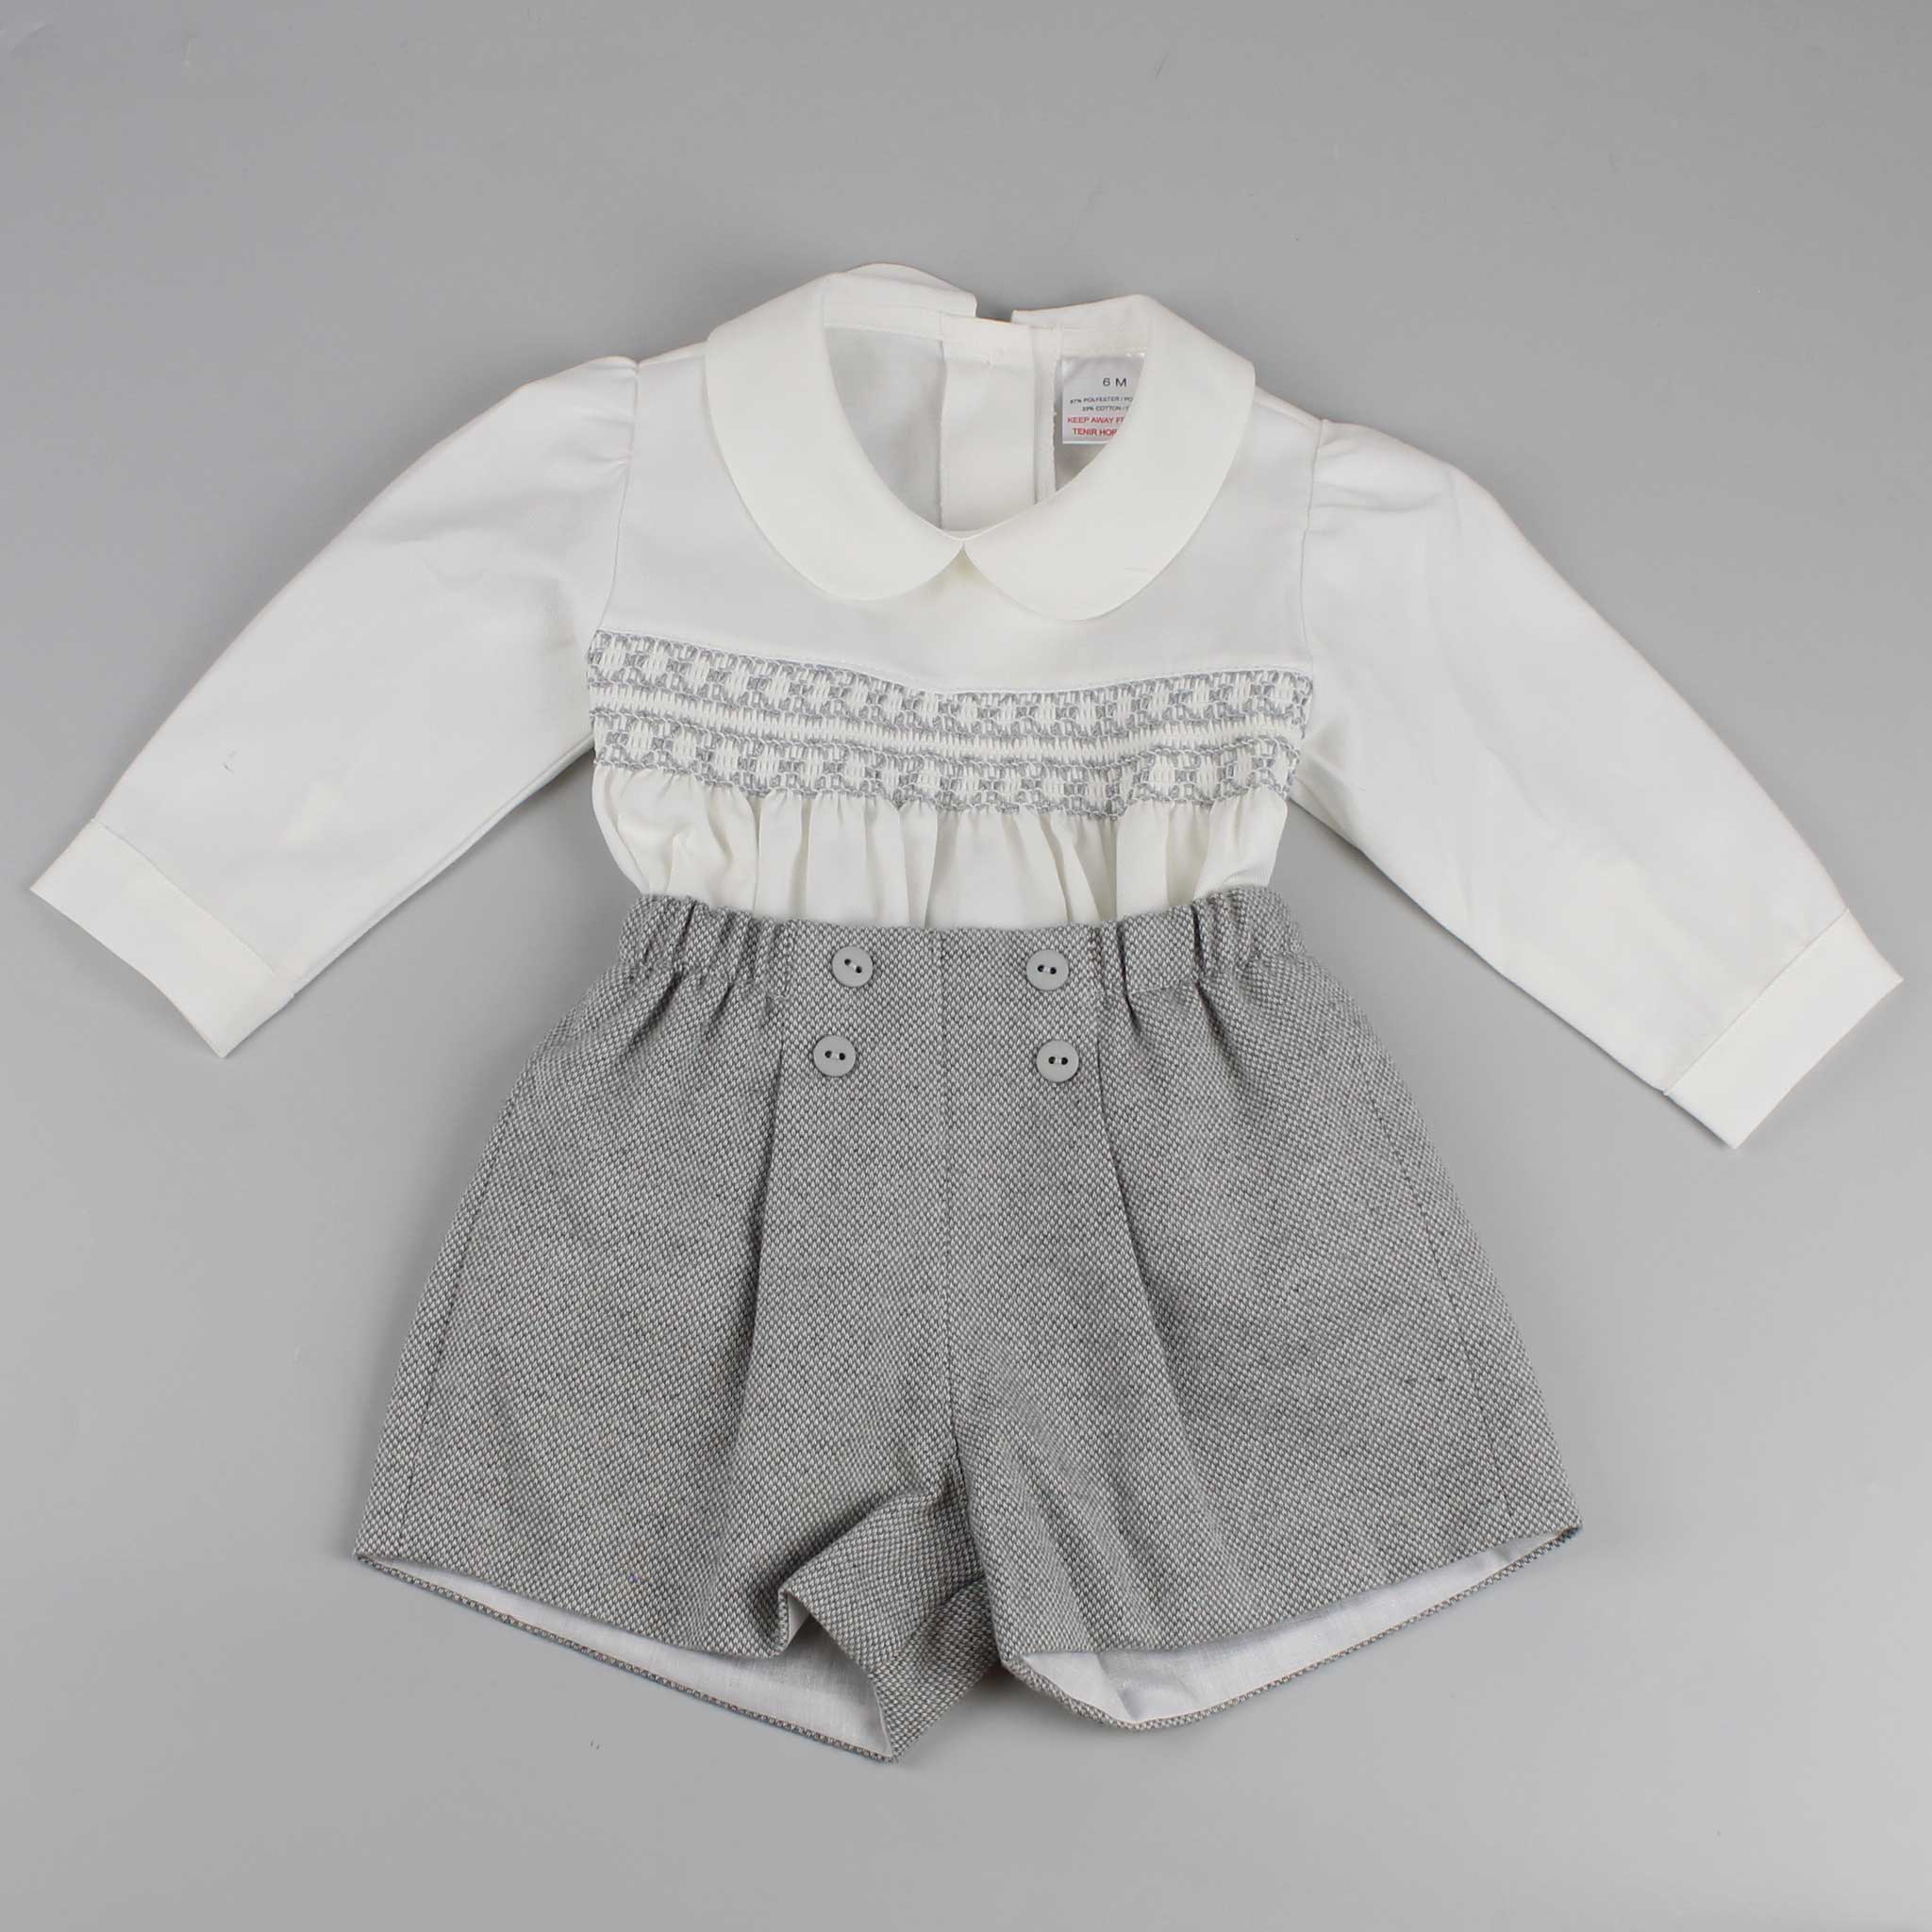 baby boys traditional summer outfit grey shorts and shirt